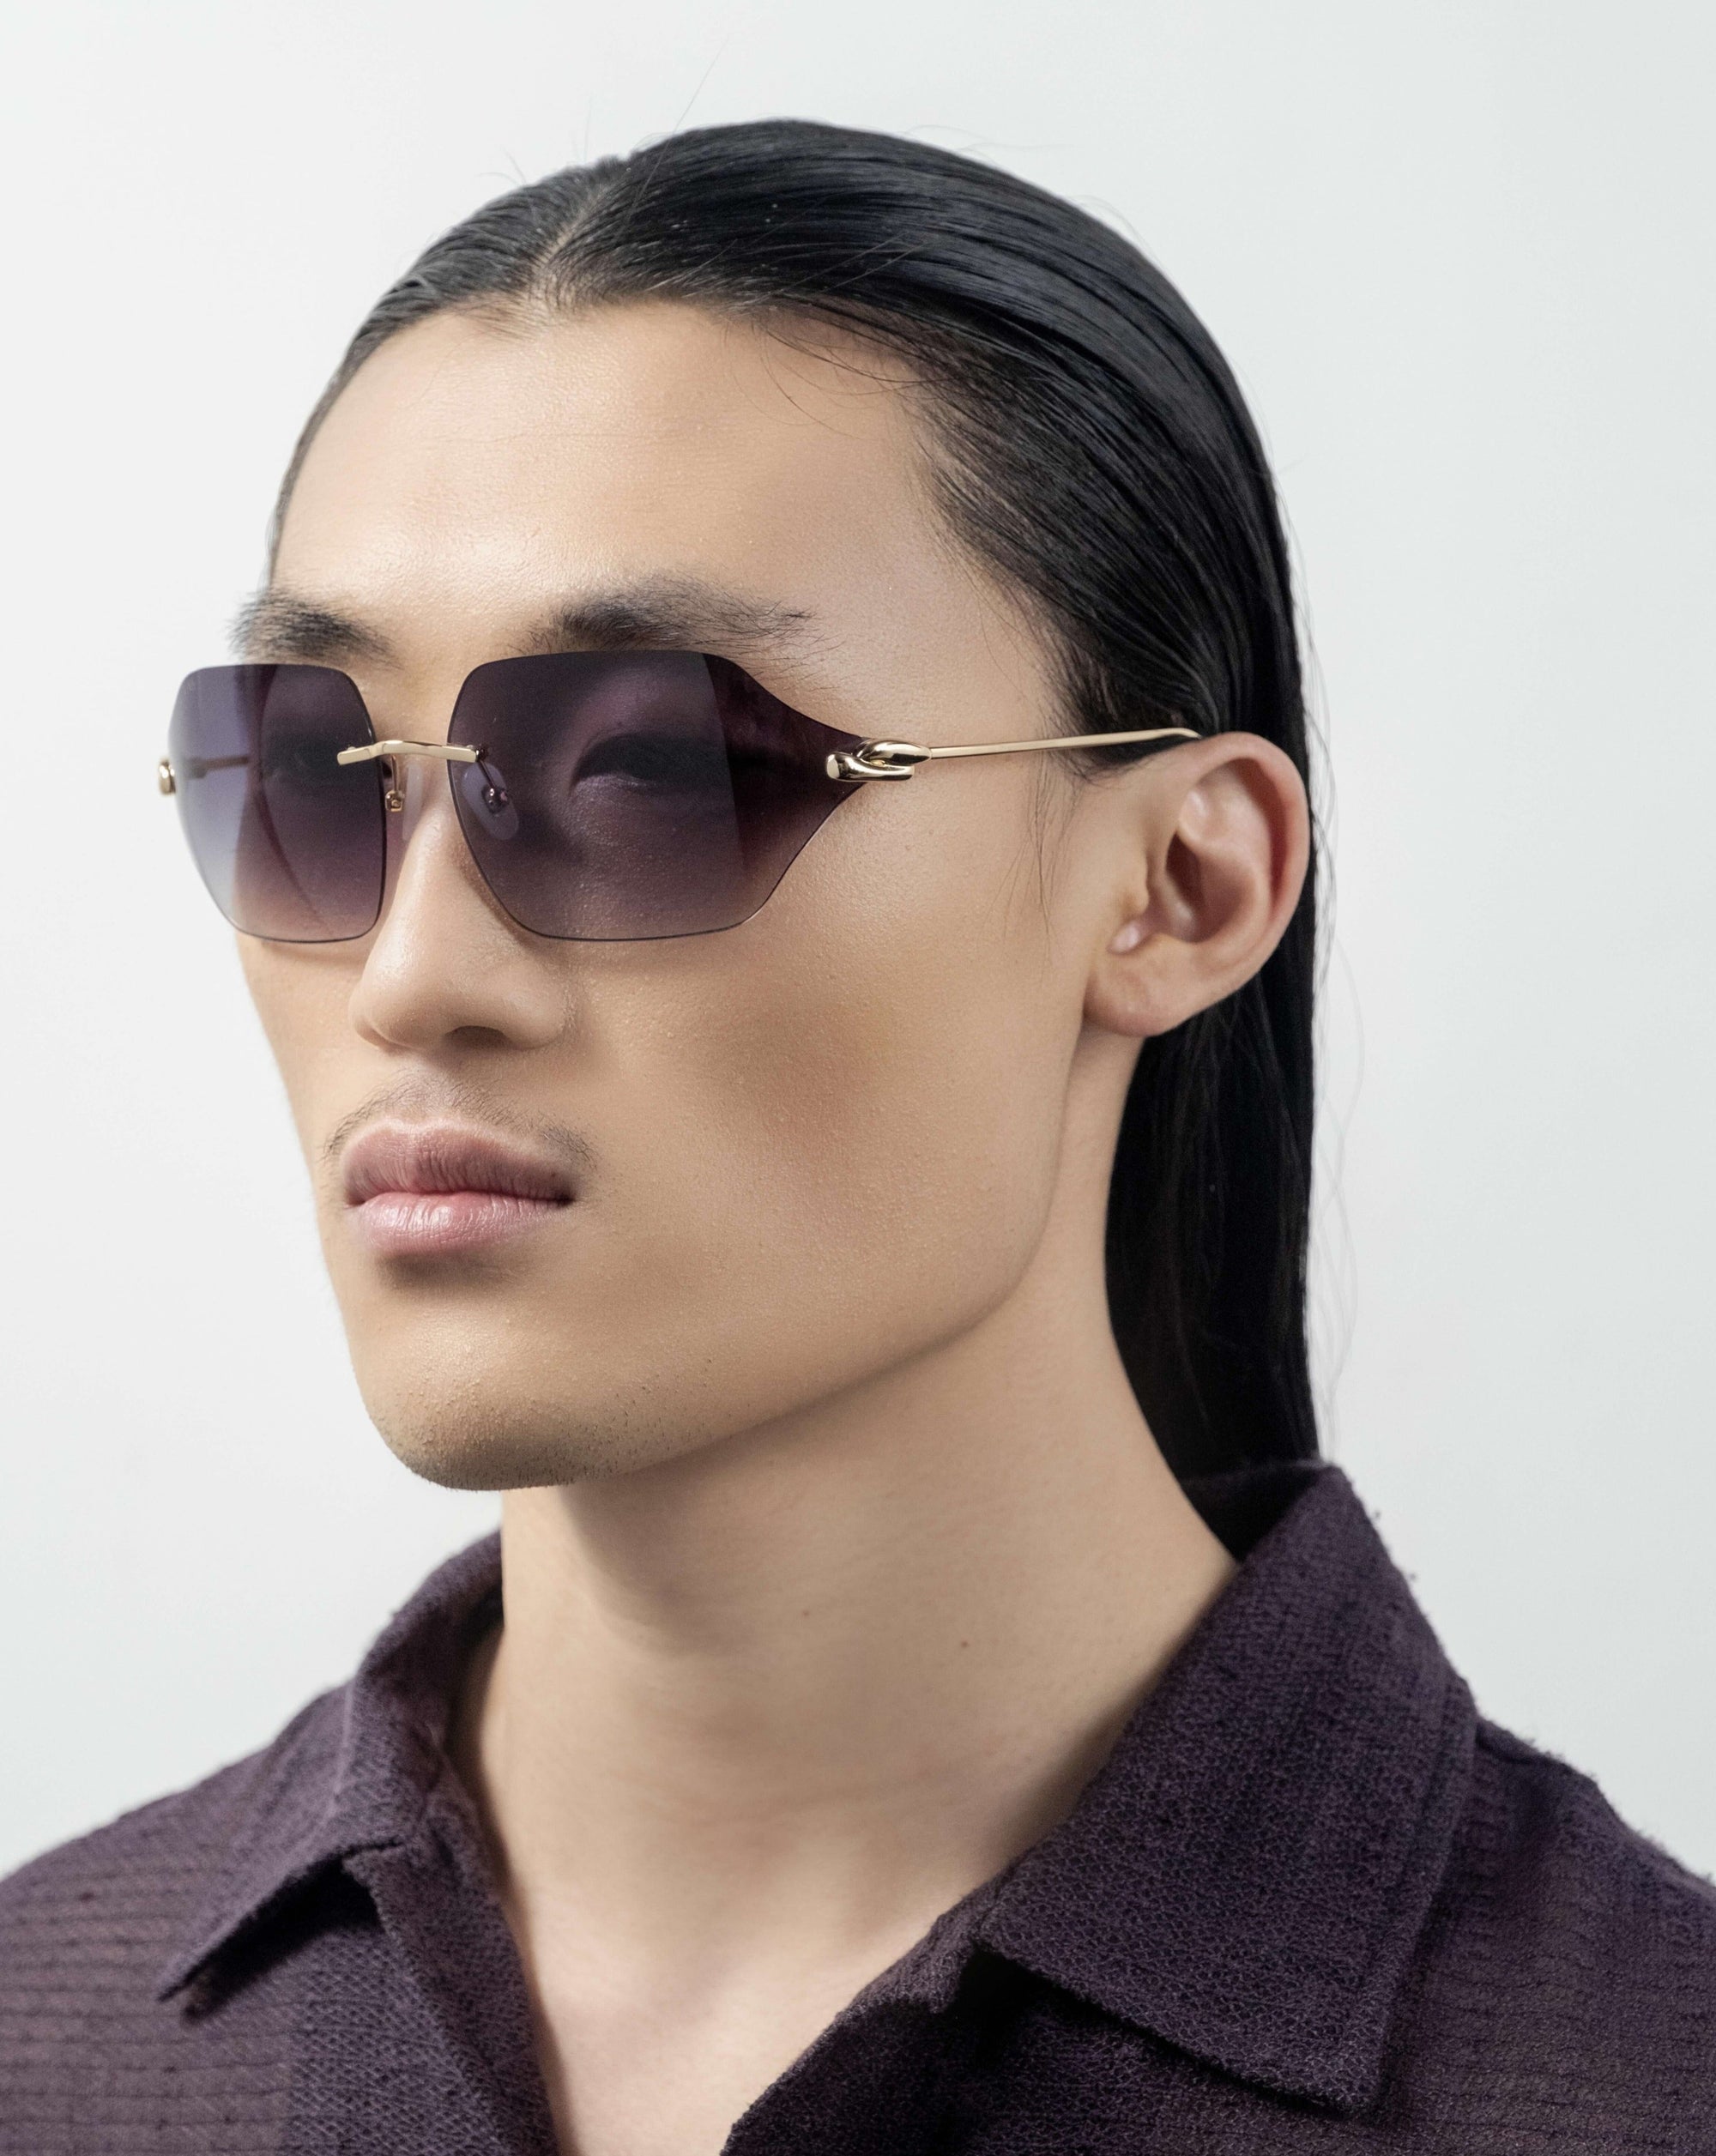 A person with long, dark hair wearing For Art's Sake® Serpent II sunglasses featuring a frameless wrap lens design and a dark textured shirt stares confidently ahead. The background is plain and white, emphasizing their serious expression and modern, stylish appearance.